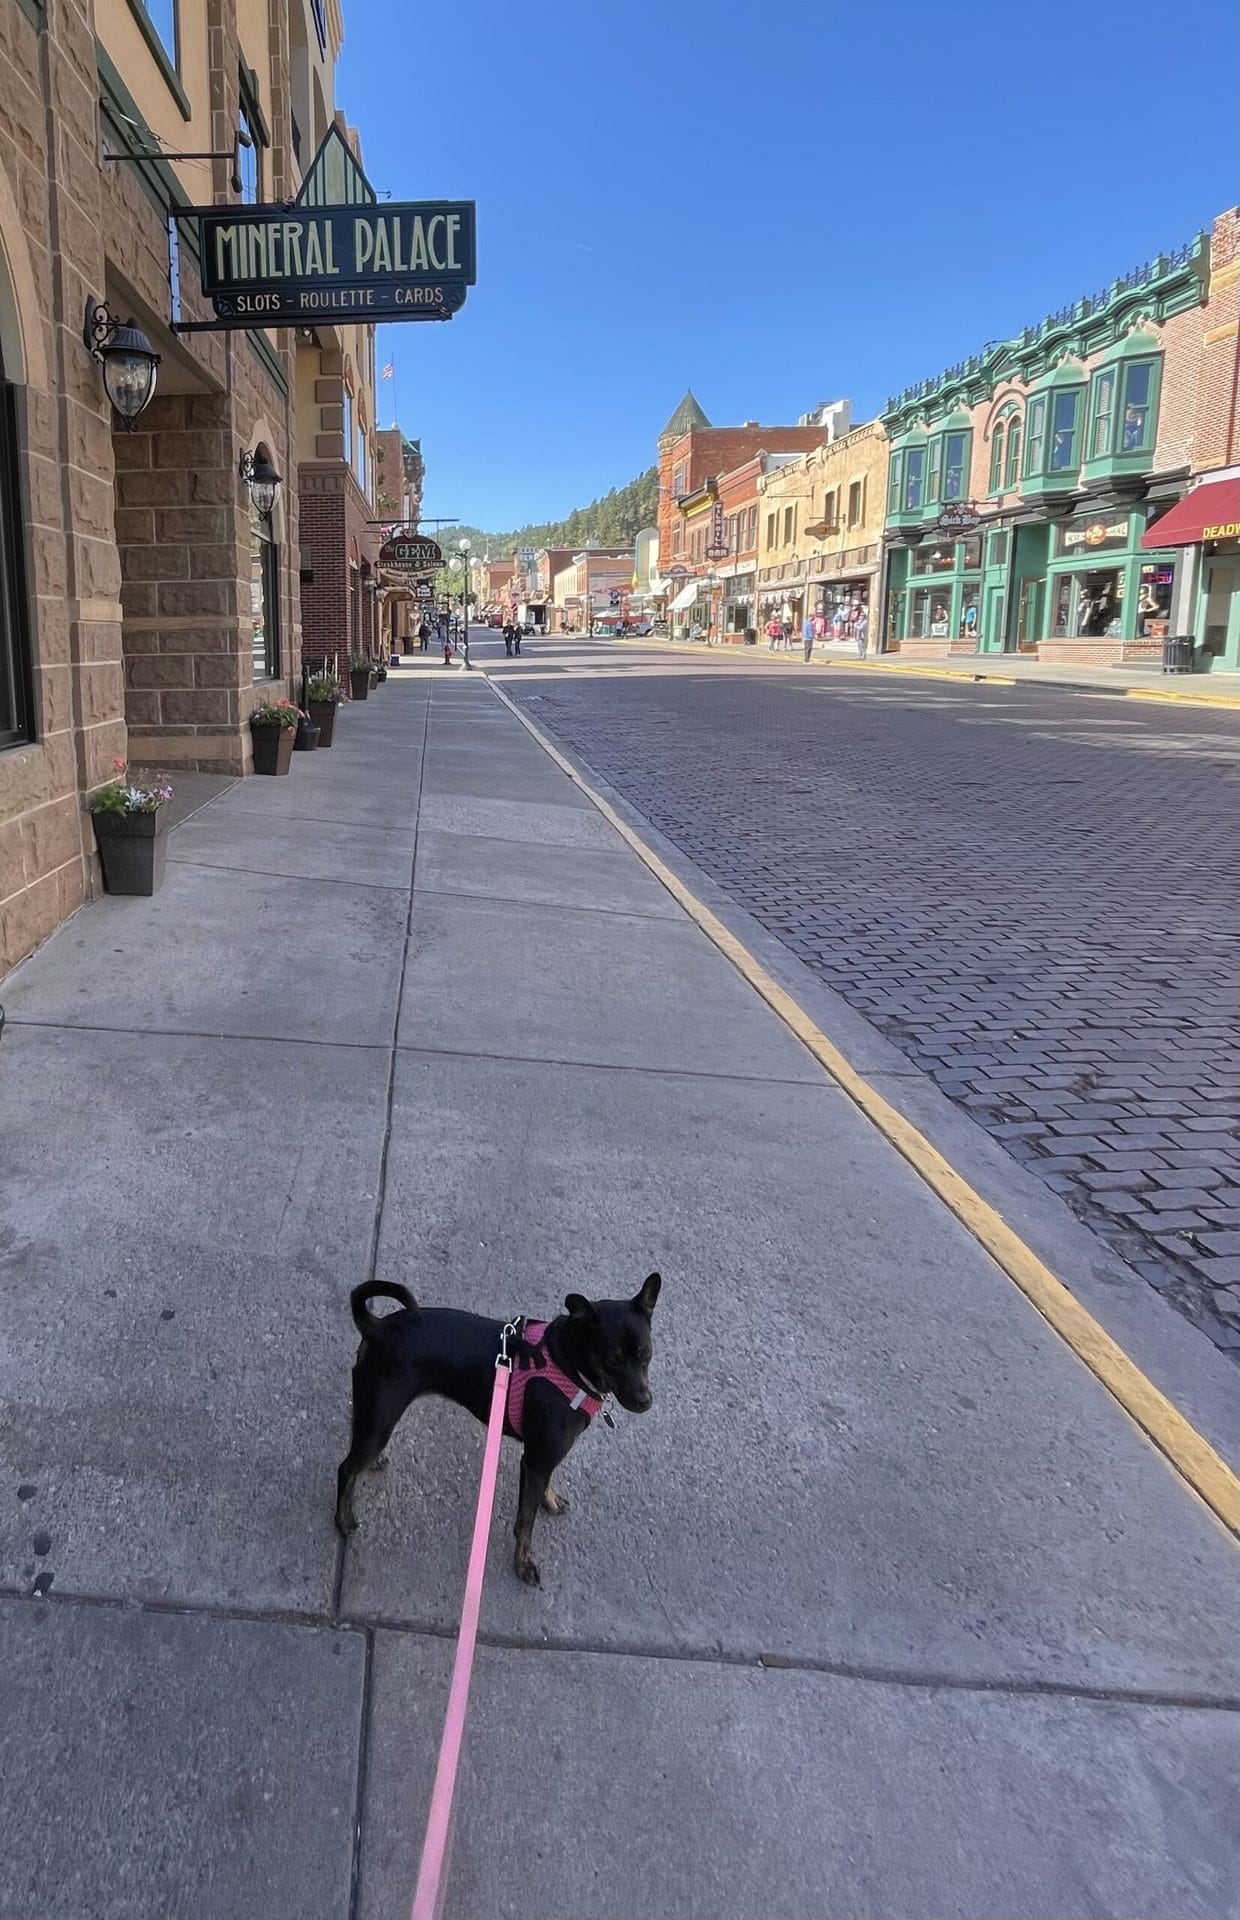 Dog standing in a street of Deadwood where the building resemble and Old Western